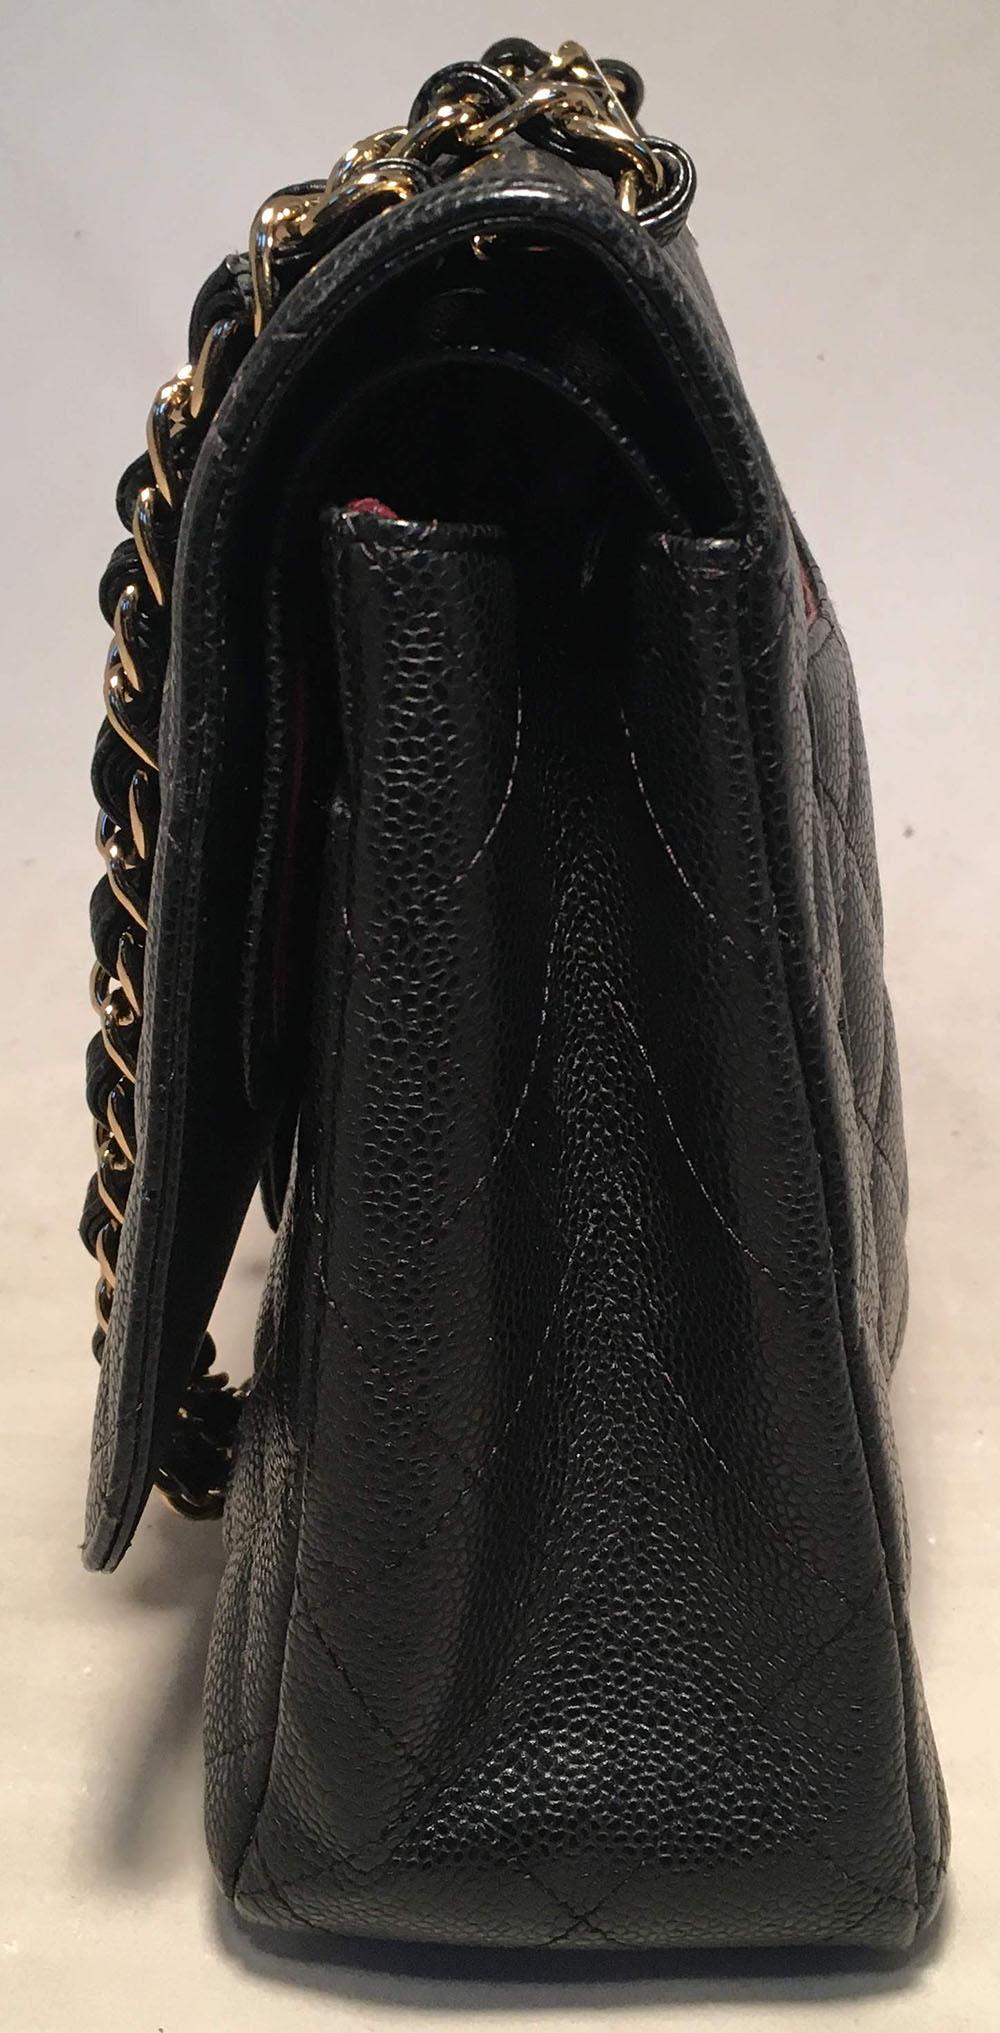 TIMELESS Chanel Black Quilted Caviar Maxi Classic Flap Shoulder Bag in excellent condition. Black quilted caviar leather exterior trimmed with gold hardware and signature woven chain and leather shoulder strap. Twisting CC logo closure opens via